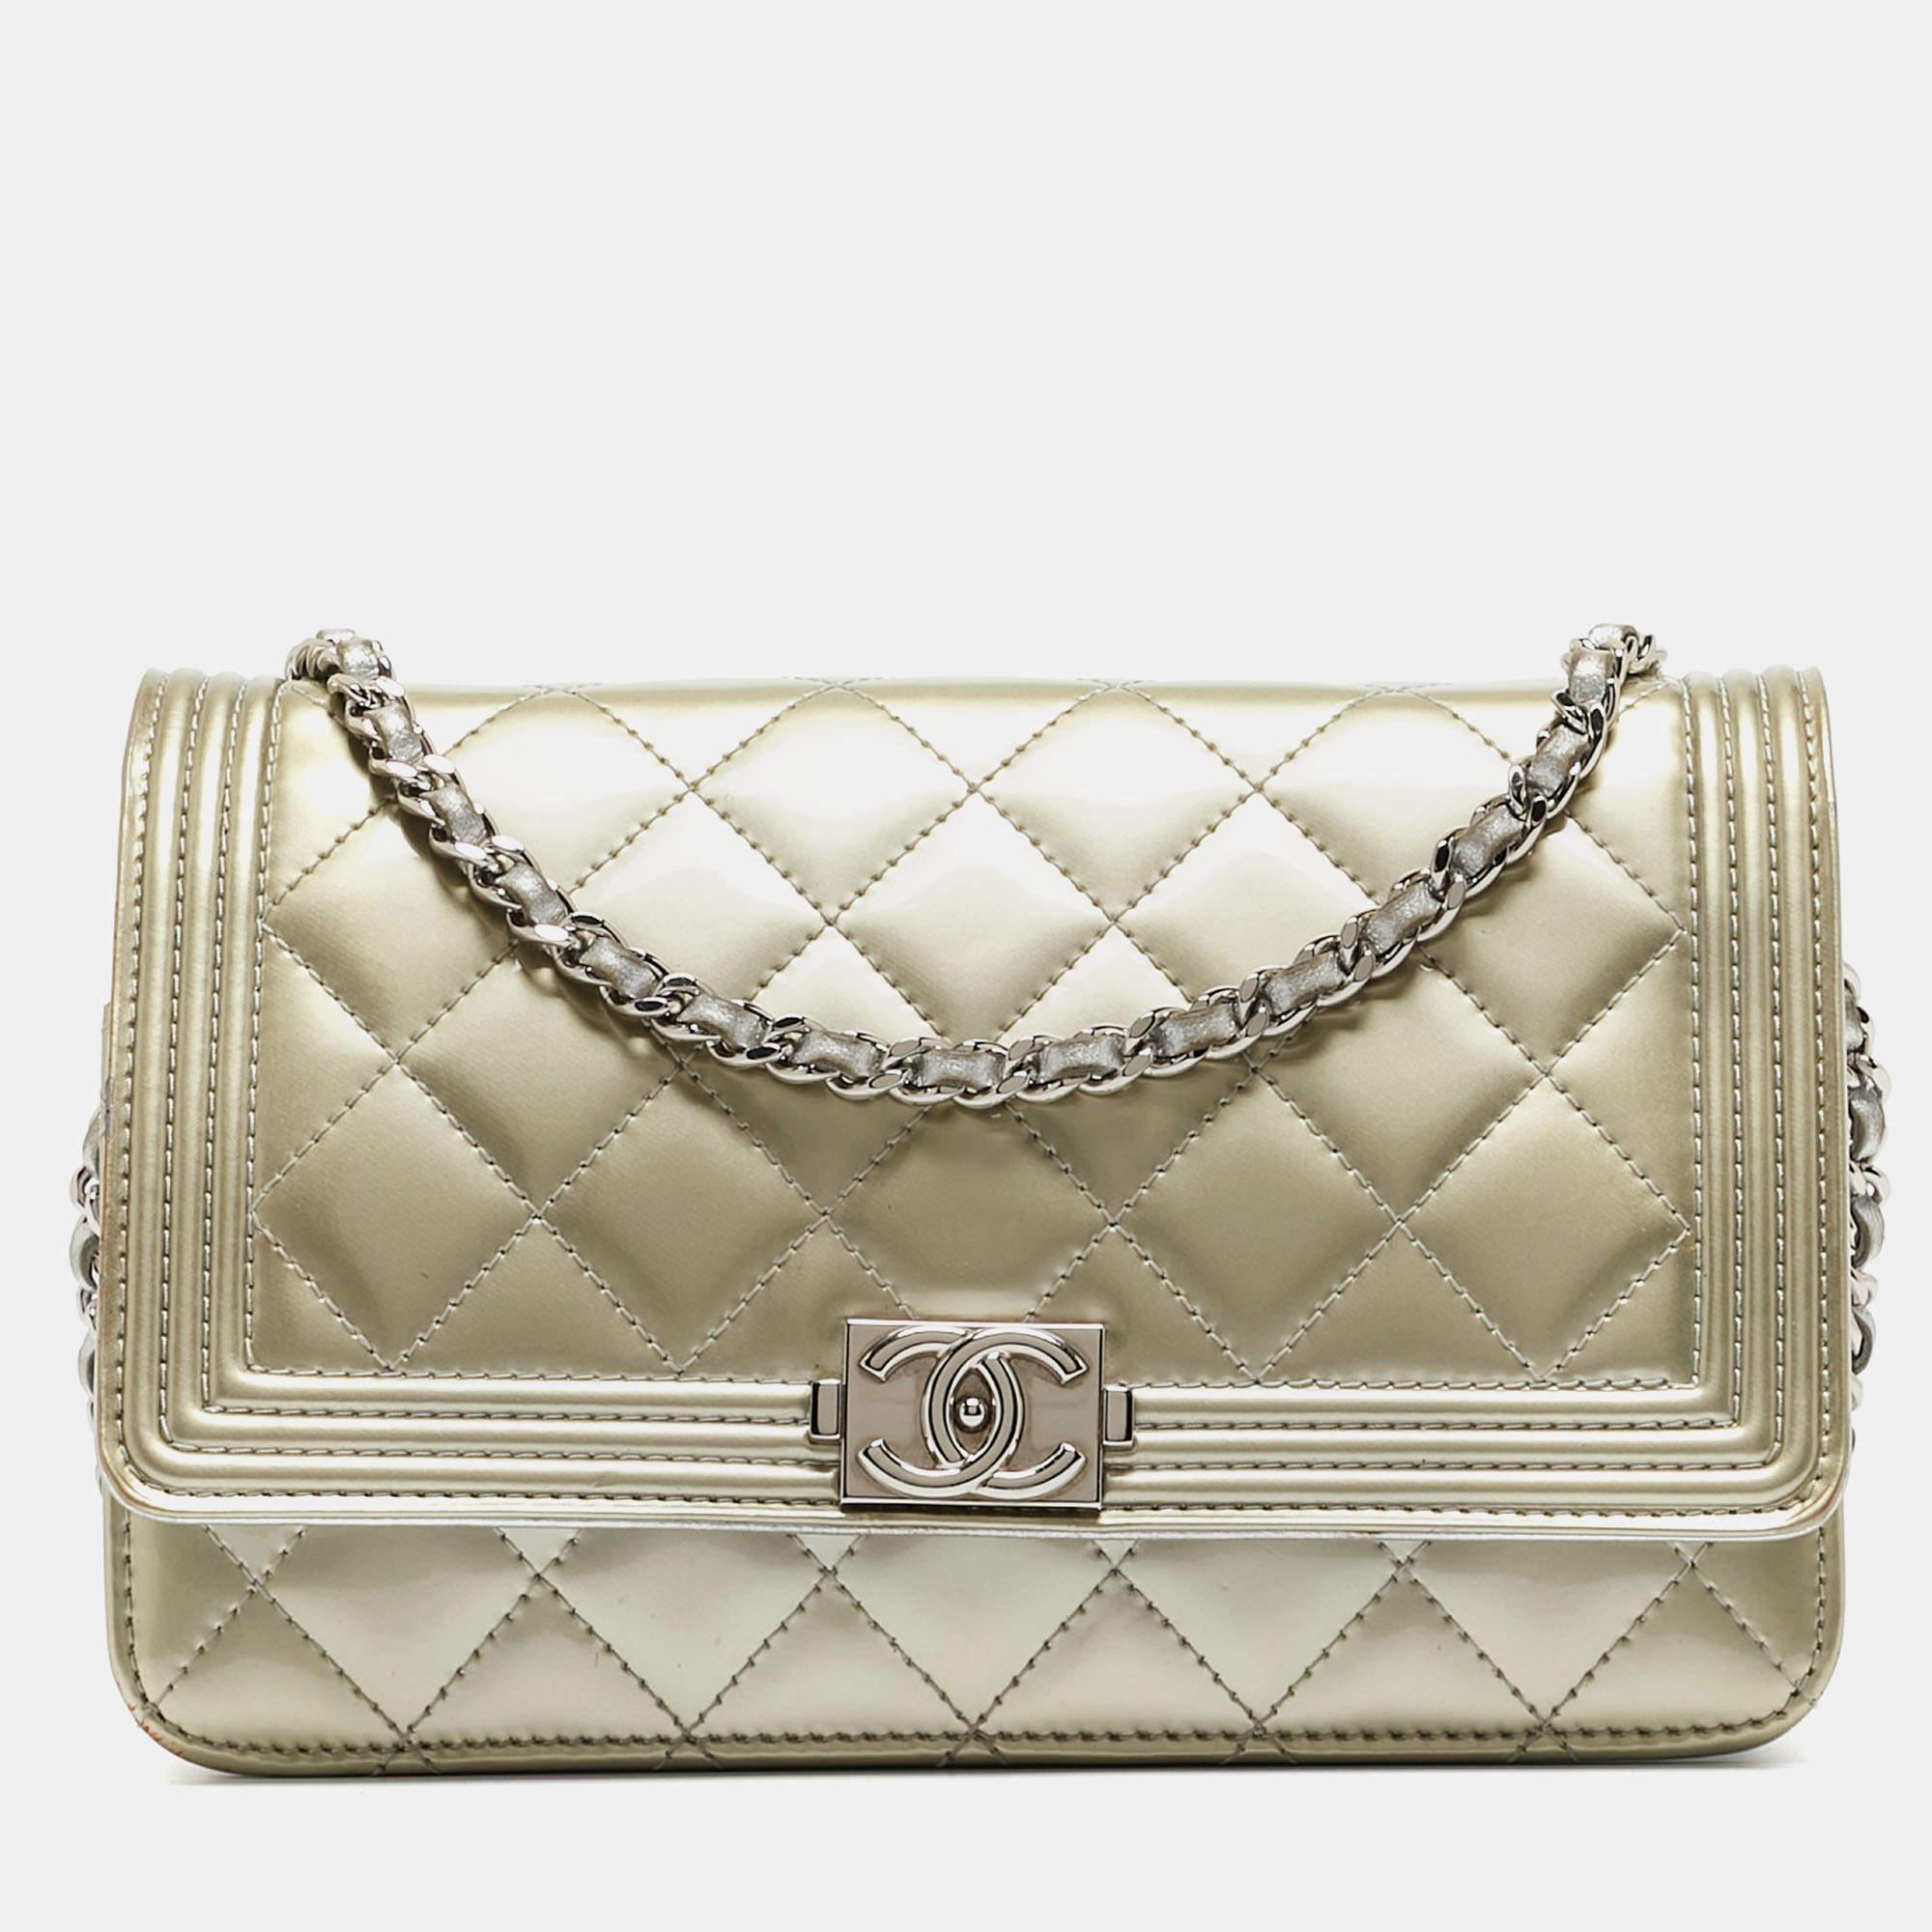 Chanel Pale Gold Quilted Patent Leather Boy WOC Bag 8